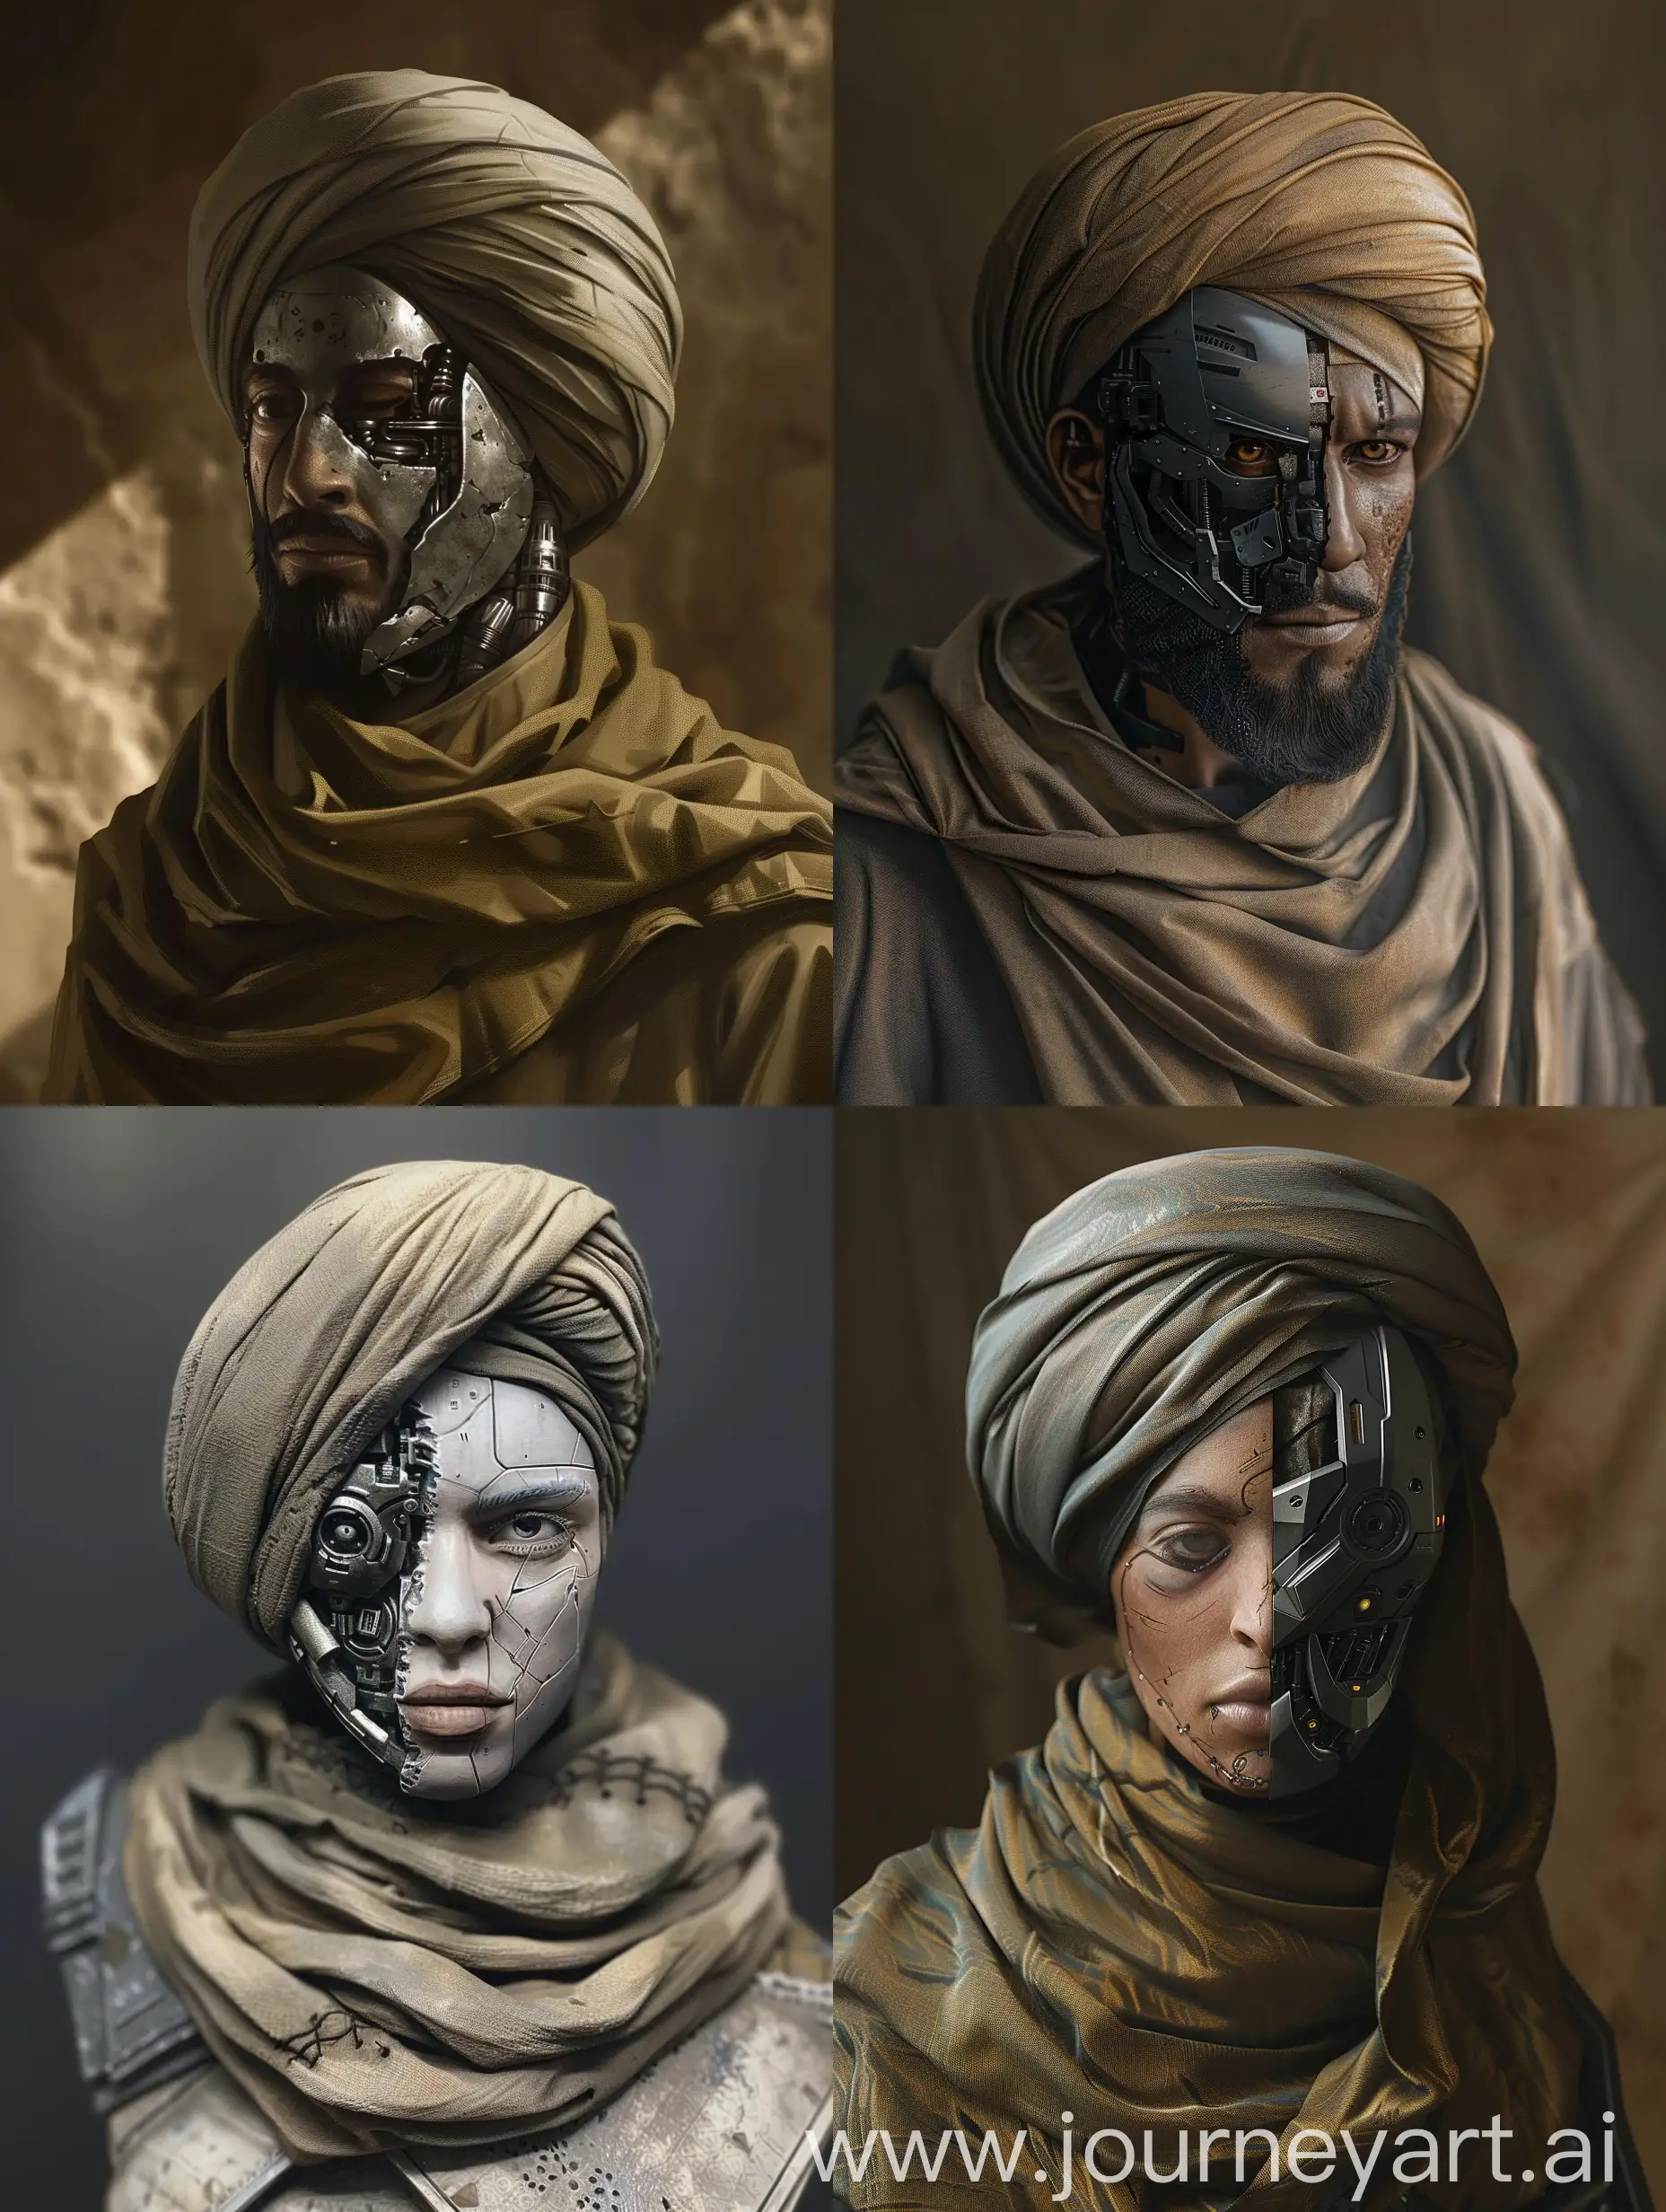 make a Muslim soldier with a half robot face wearing a turban 
